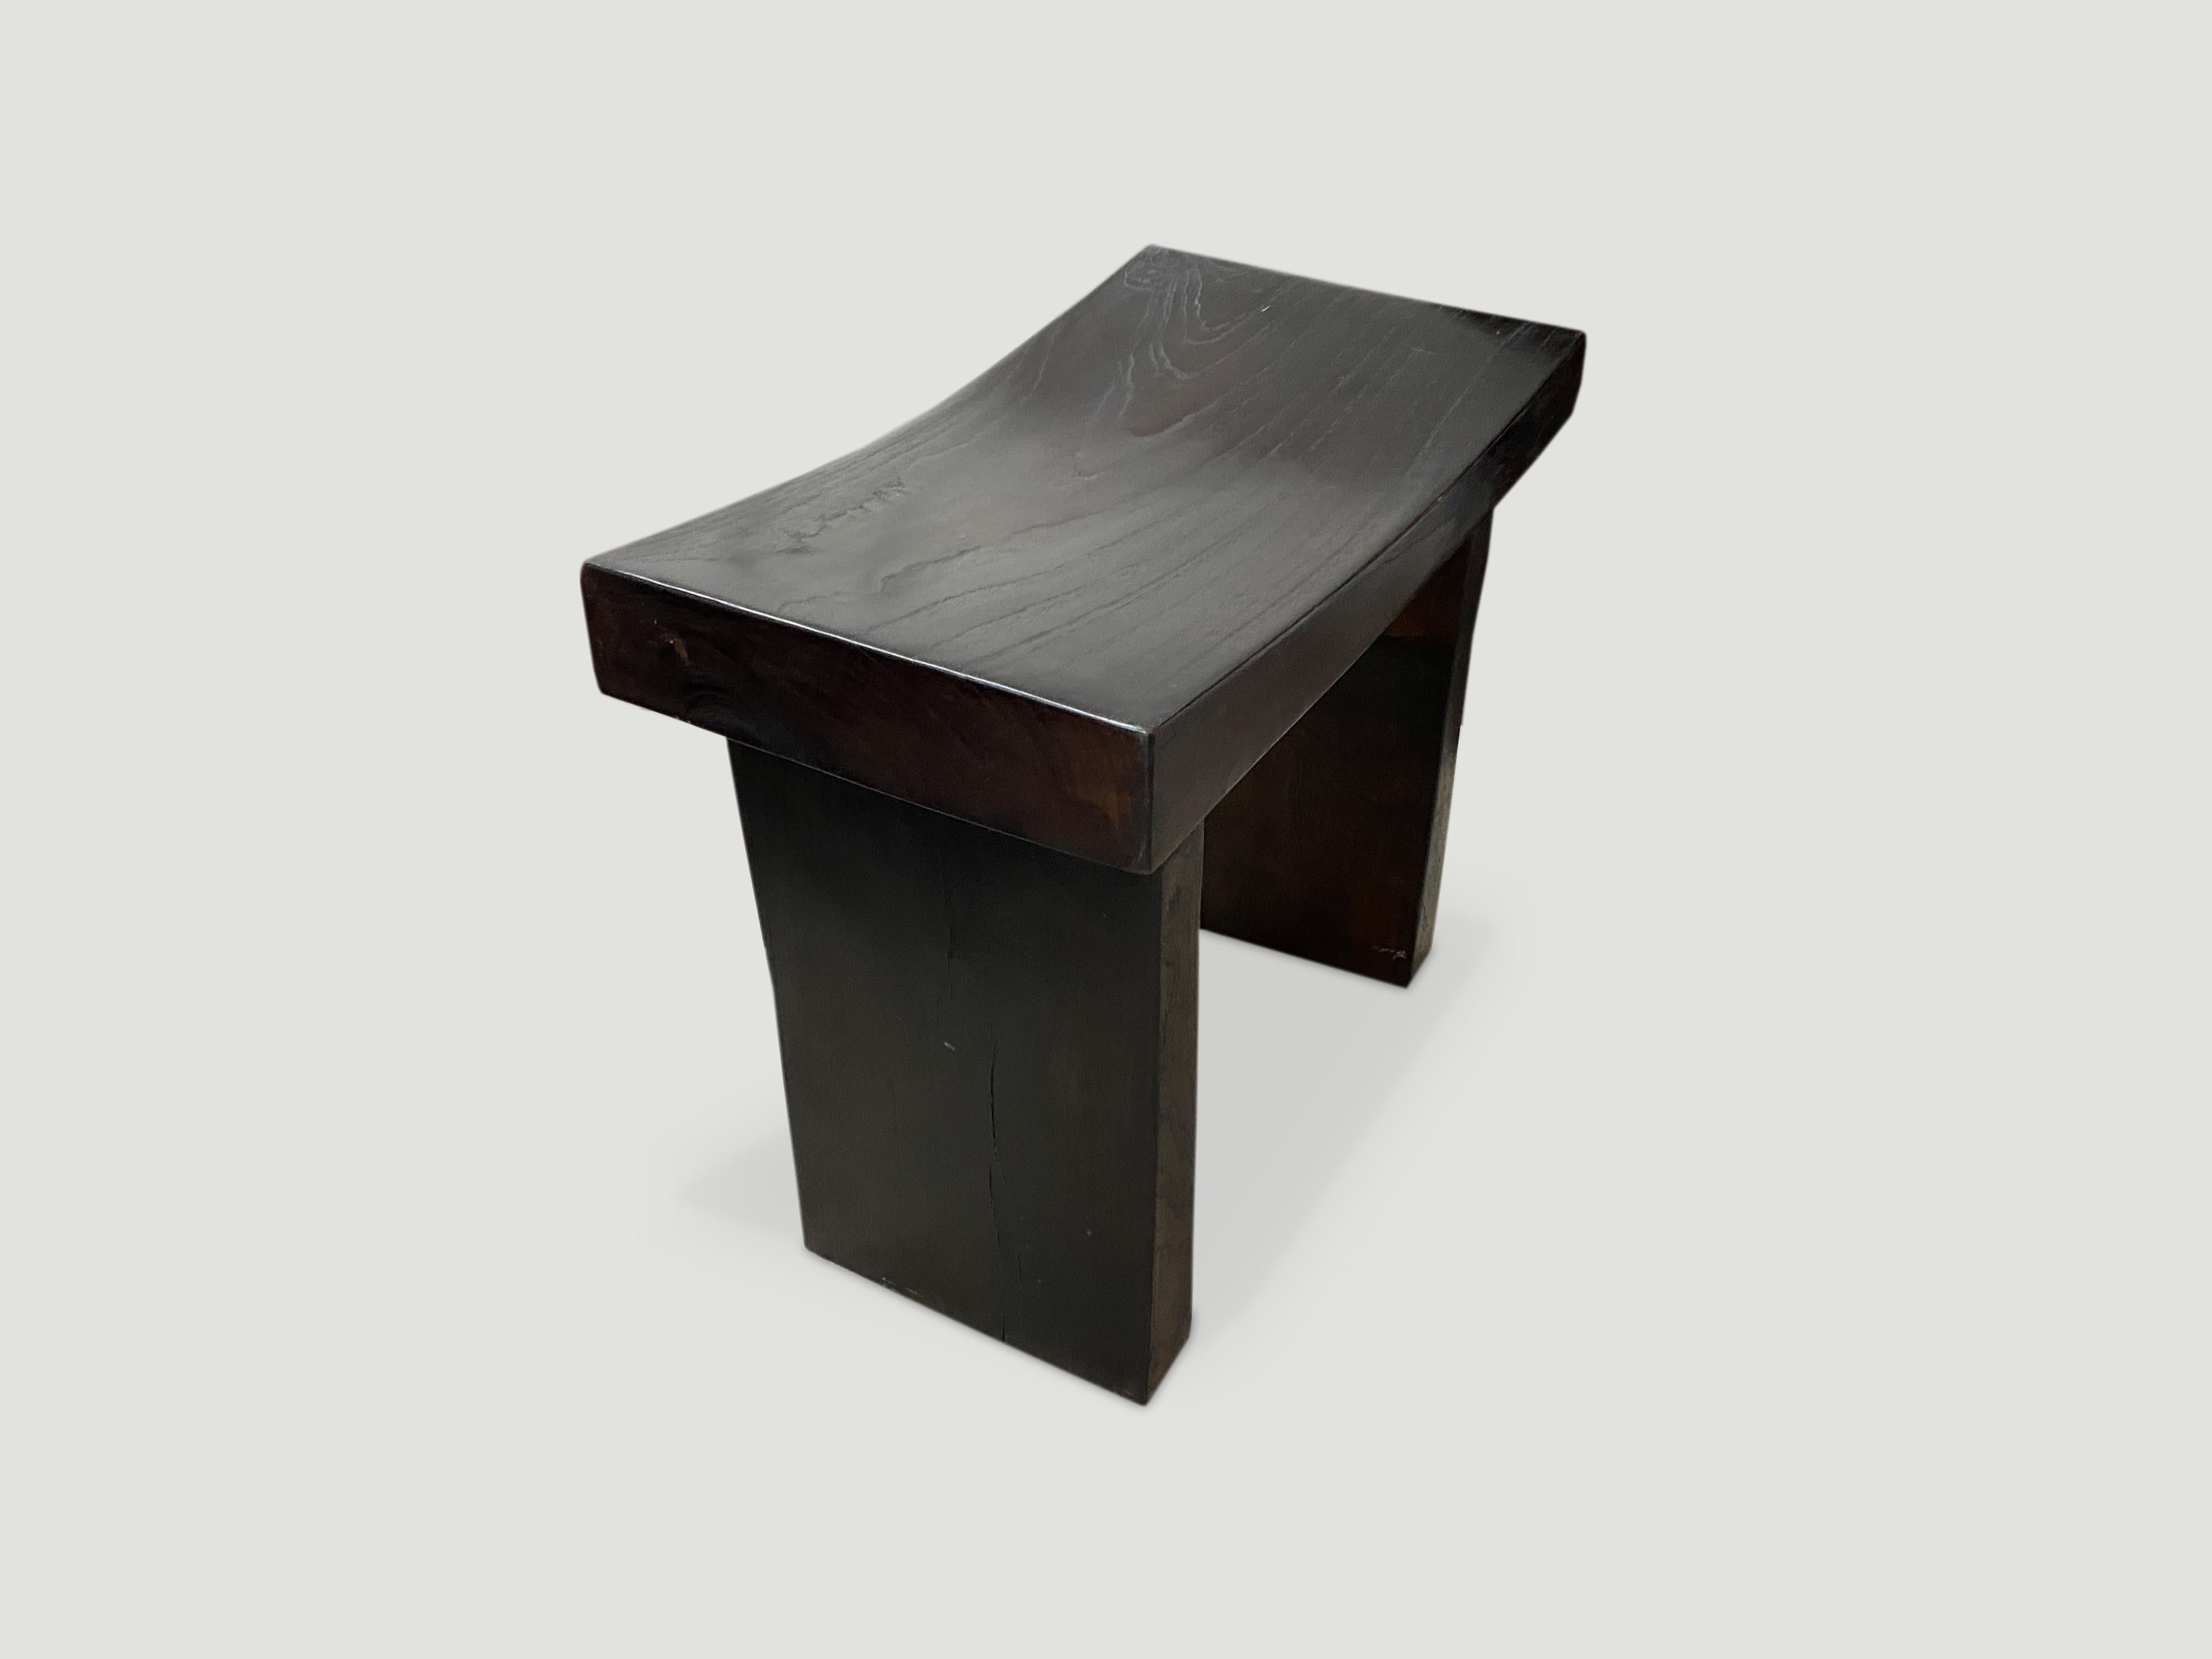 Andrianna Shamaris Teak Wood Minimalist Bench In Excellent Condition For Sale In New York, NY